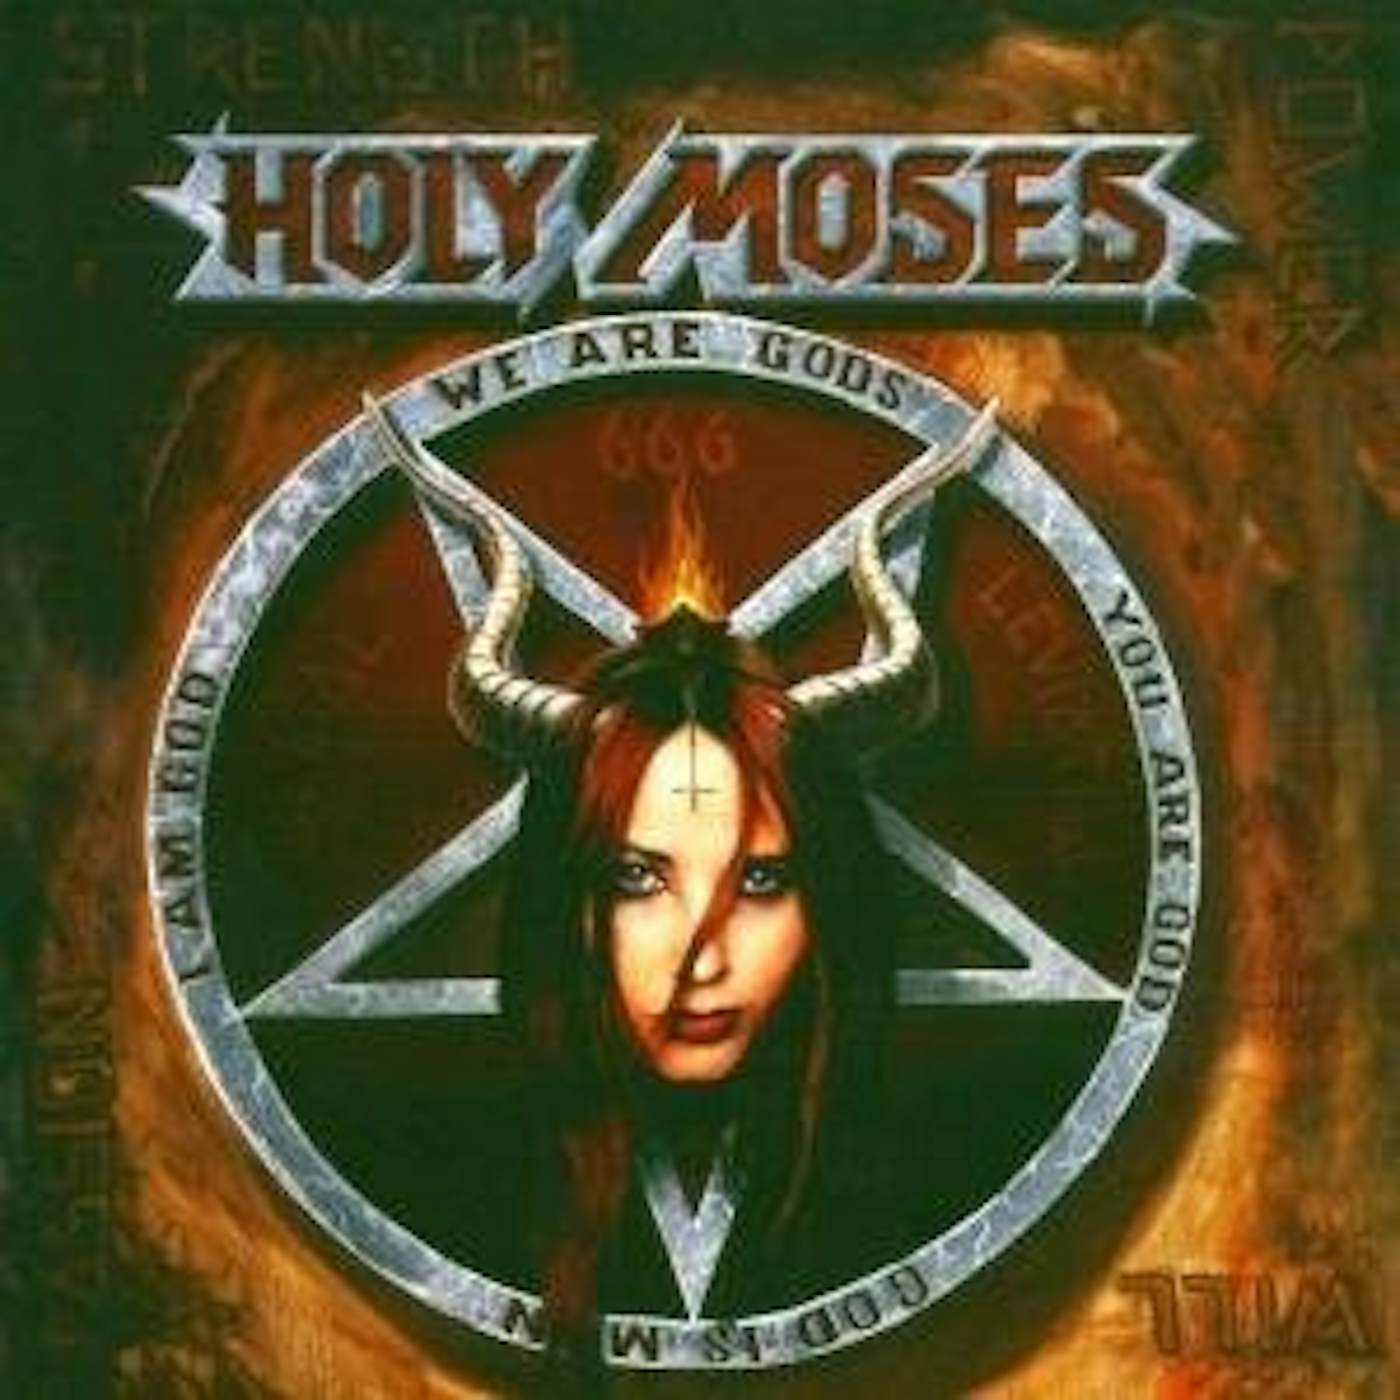 Holy Moses STRENGTH POWER WILL PASSION CD